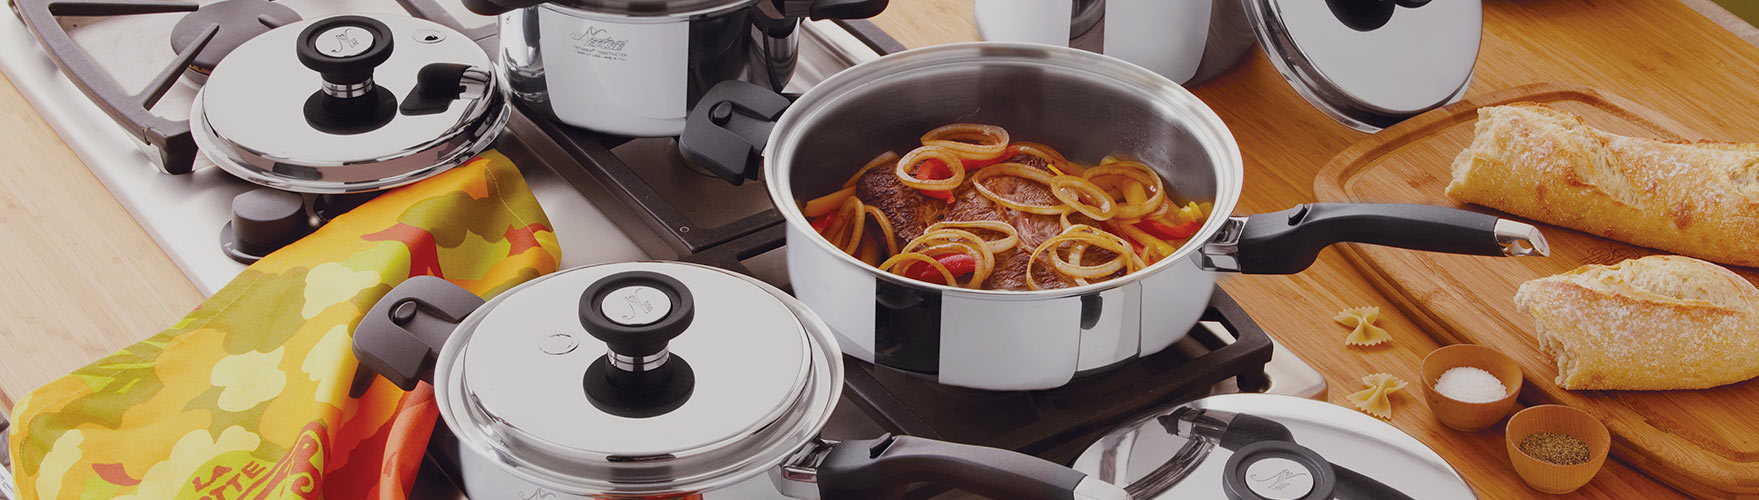 Royal Prestige Cookware | Buy Surgical Stainless Steel Cookware Online